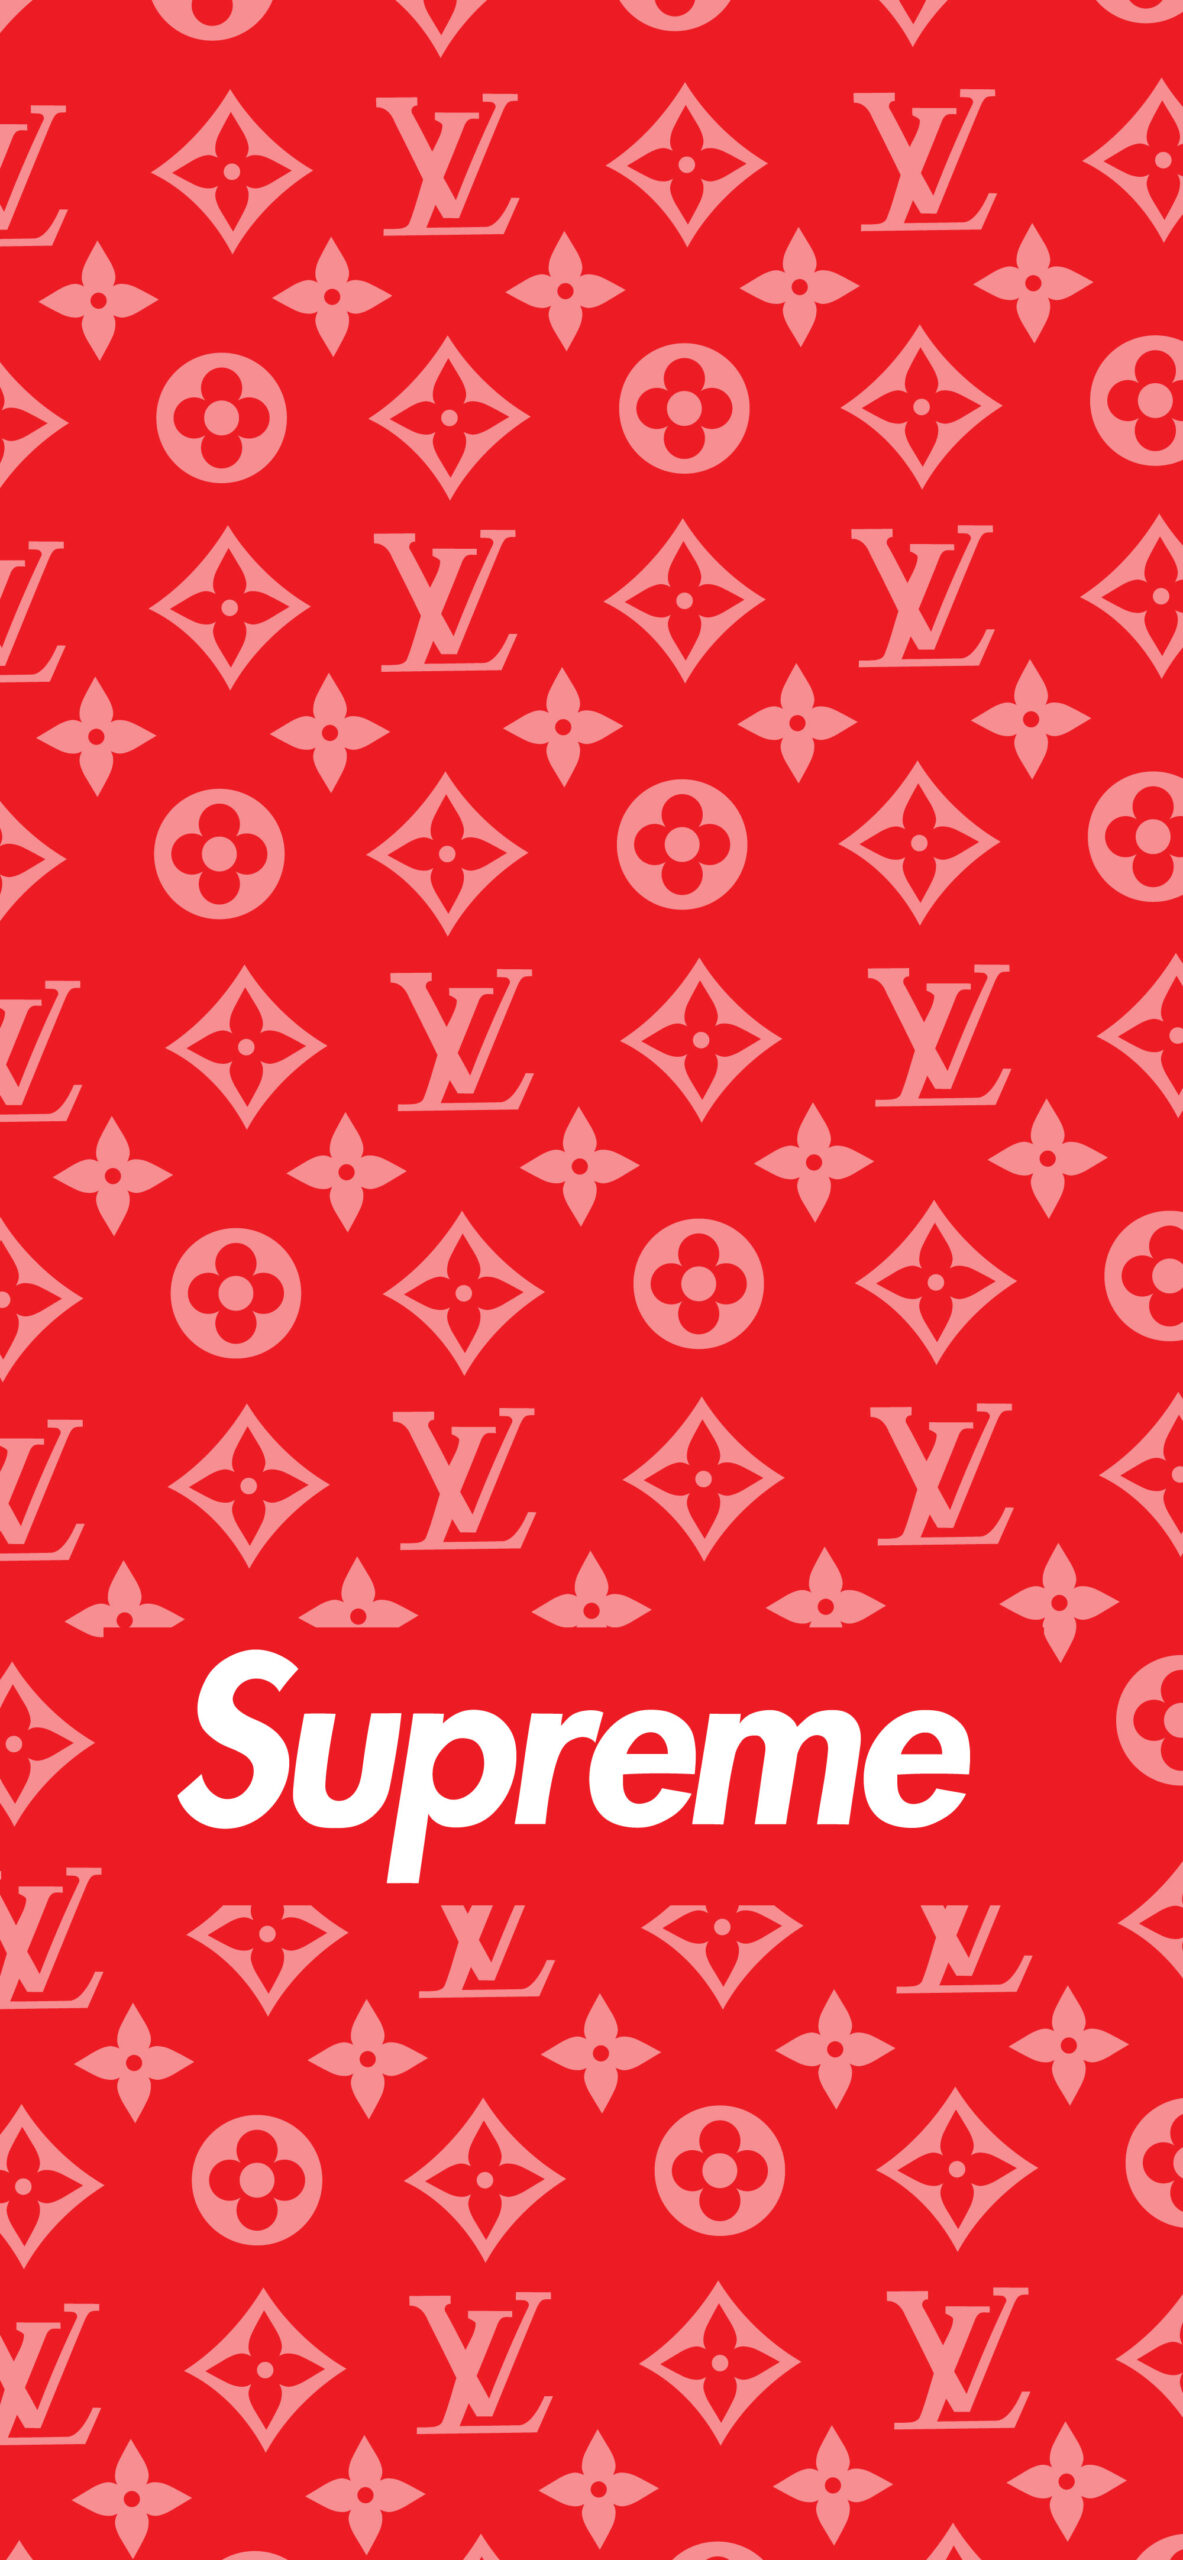 Supreme x Louis Vuitton Red Wallpaper for iPhone